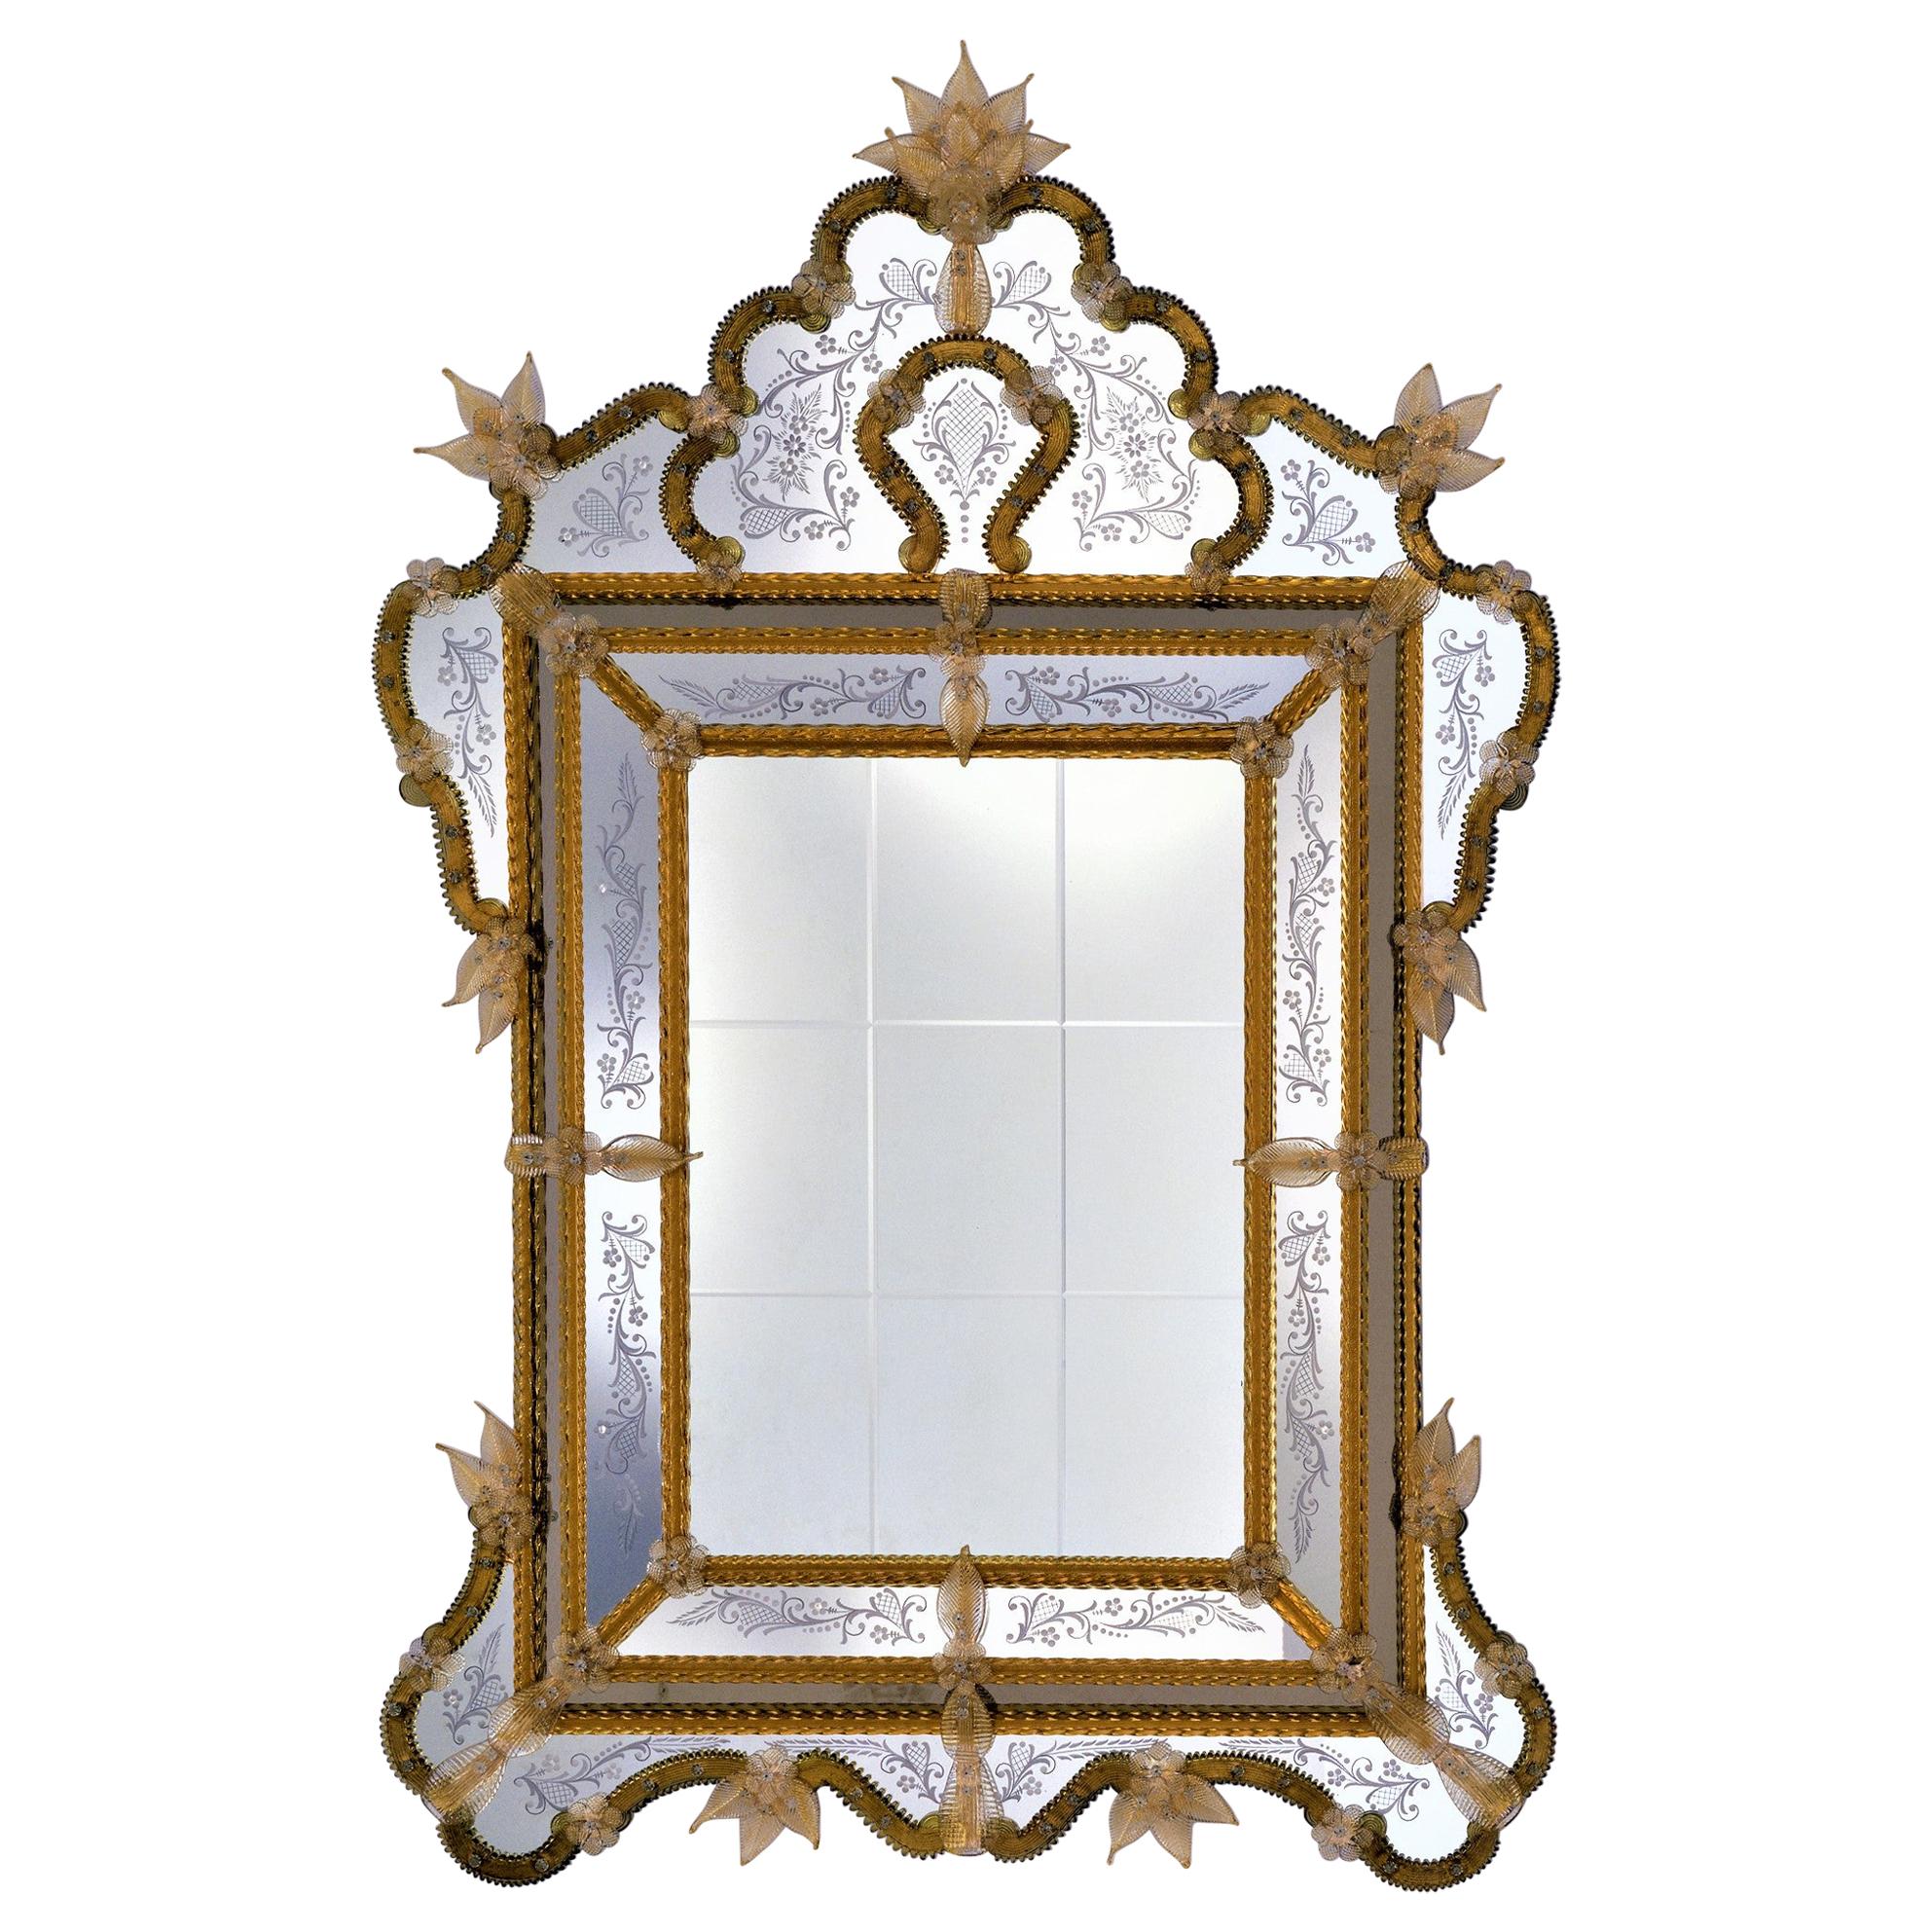 CA'D'ORO, Murano Glass Mirror in Venetian Style by Fratelli Tosi, Made in Italy For Sale